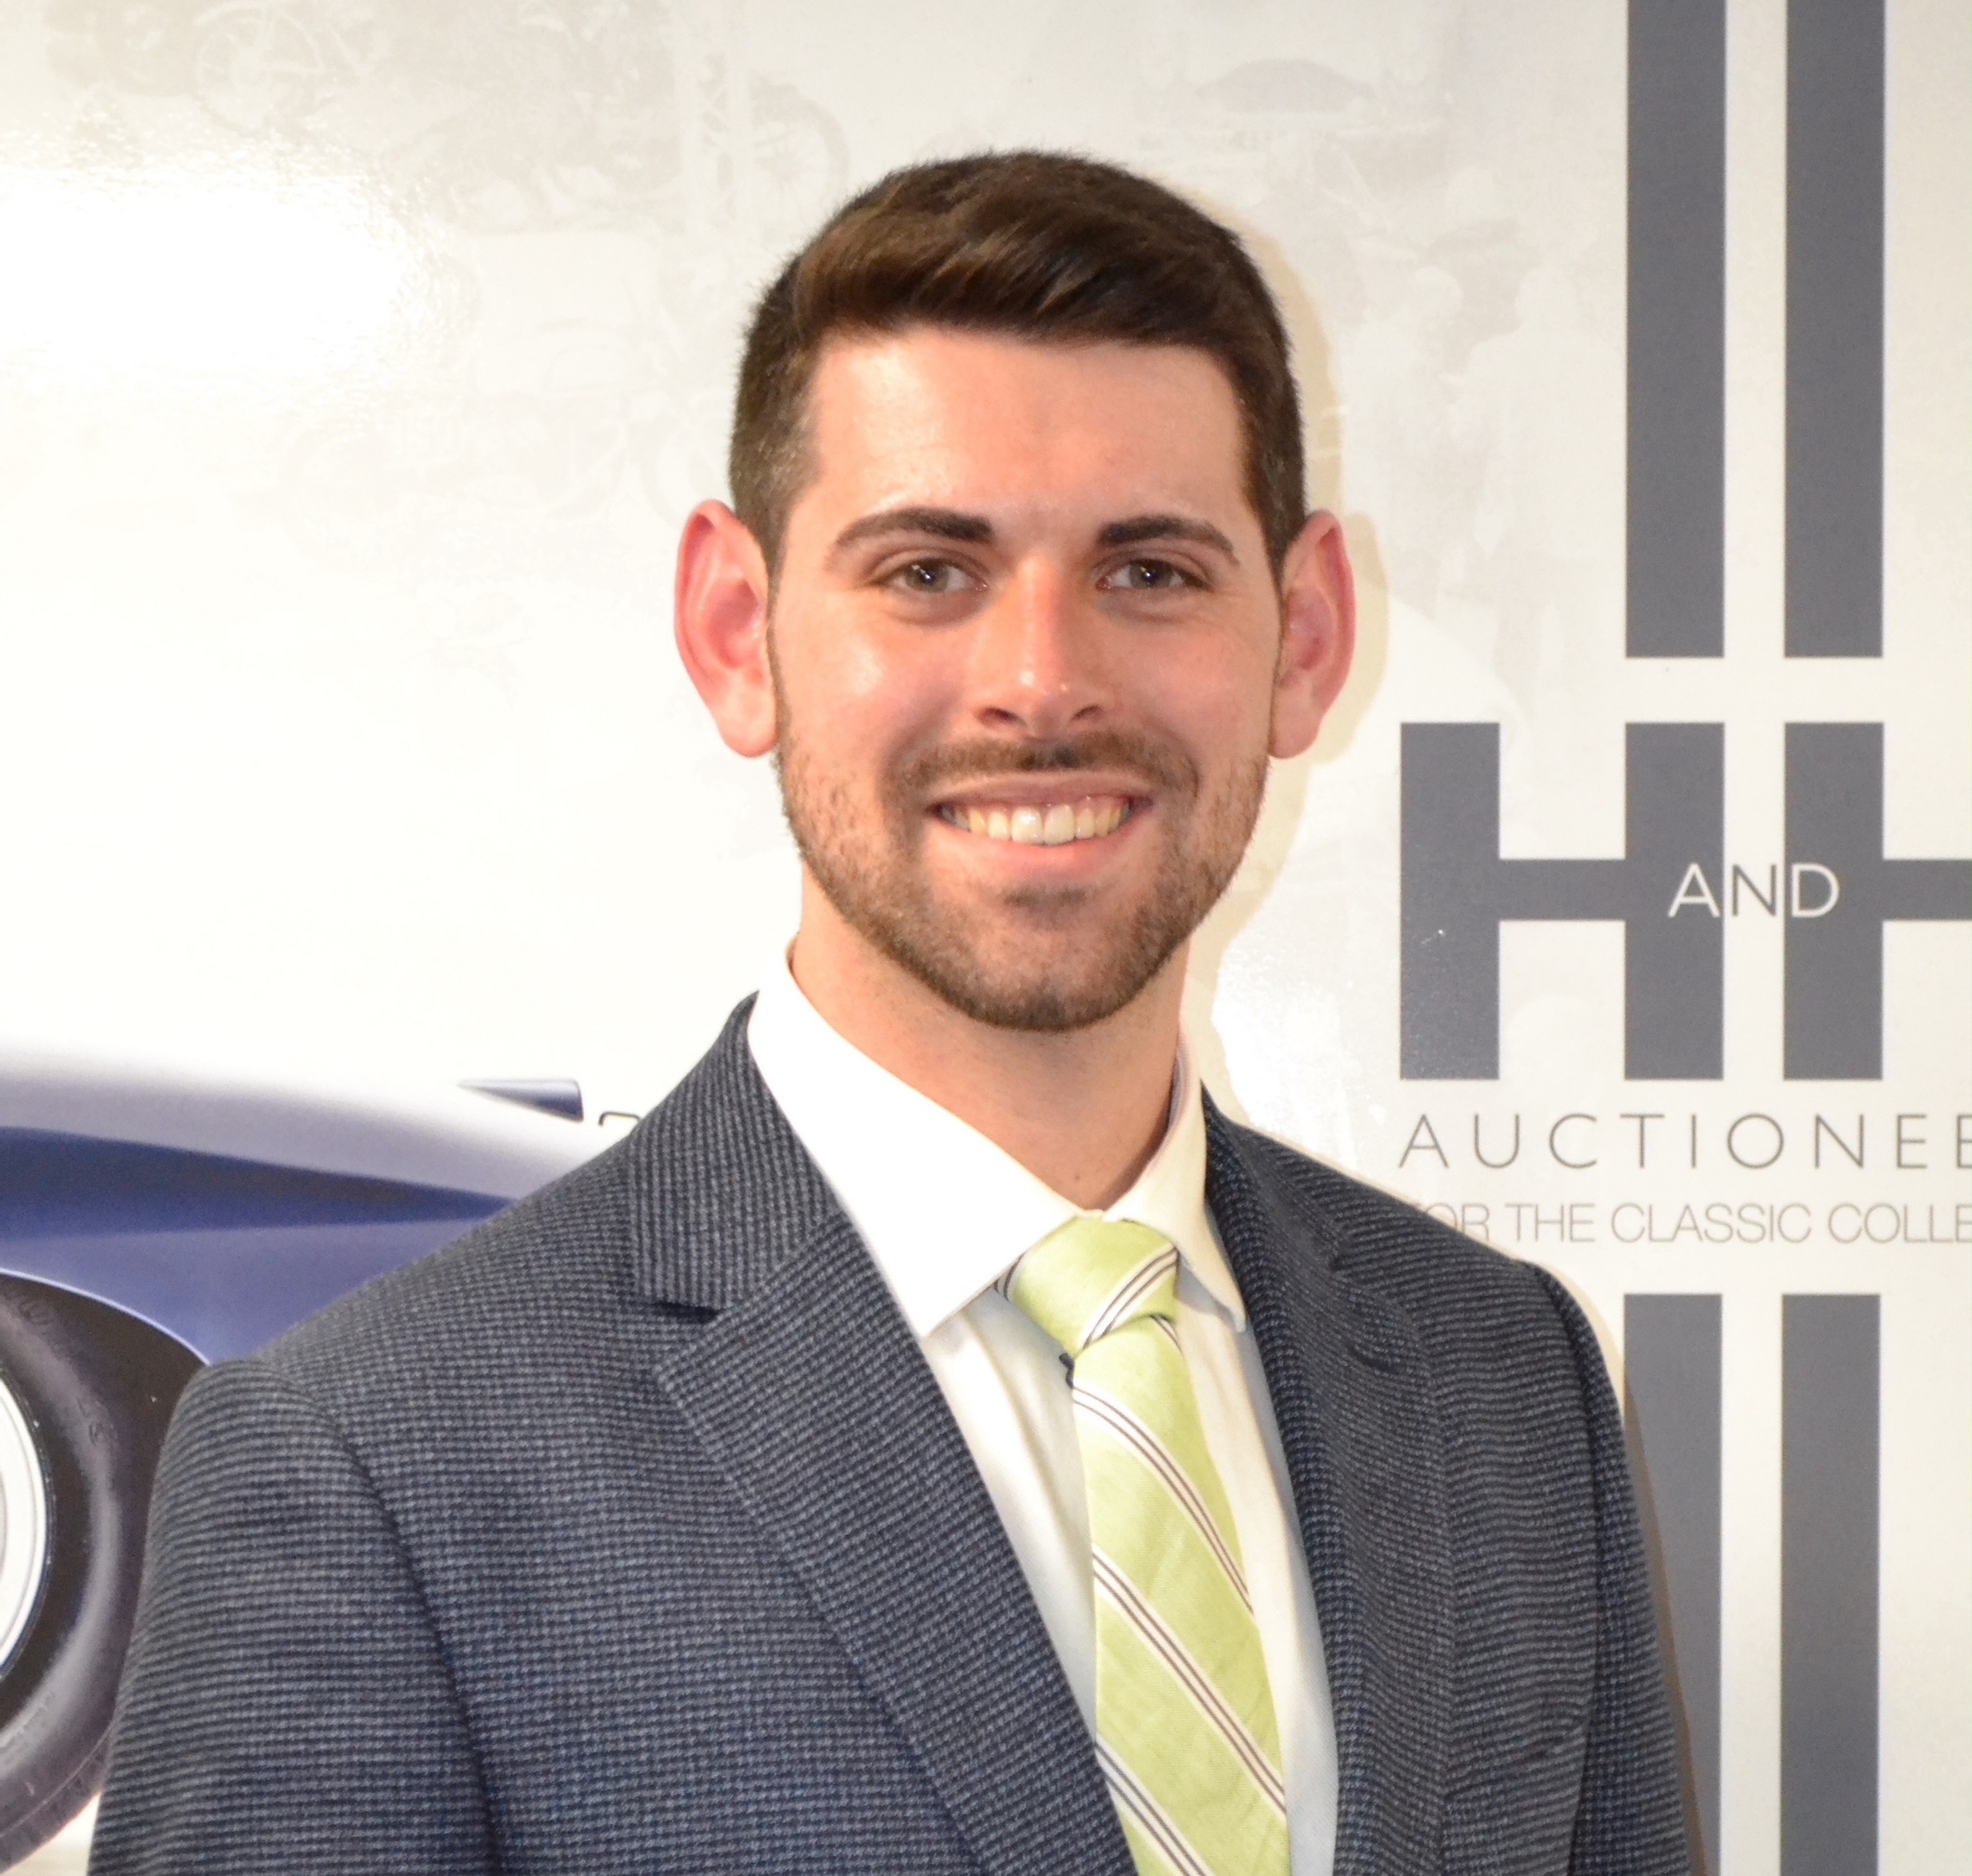 Andreas Hicks – Classic car valuation specialist